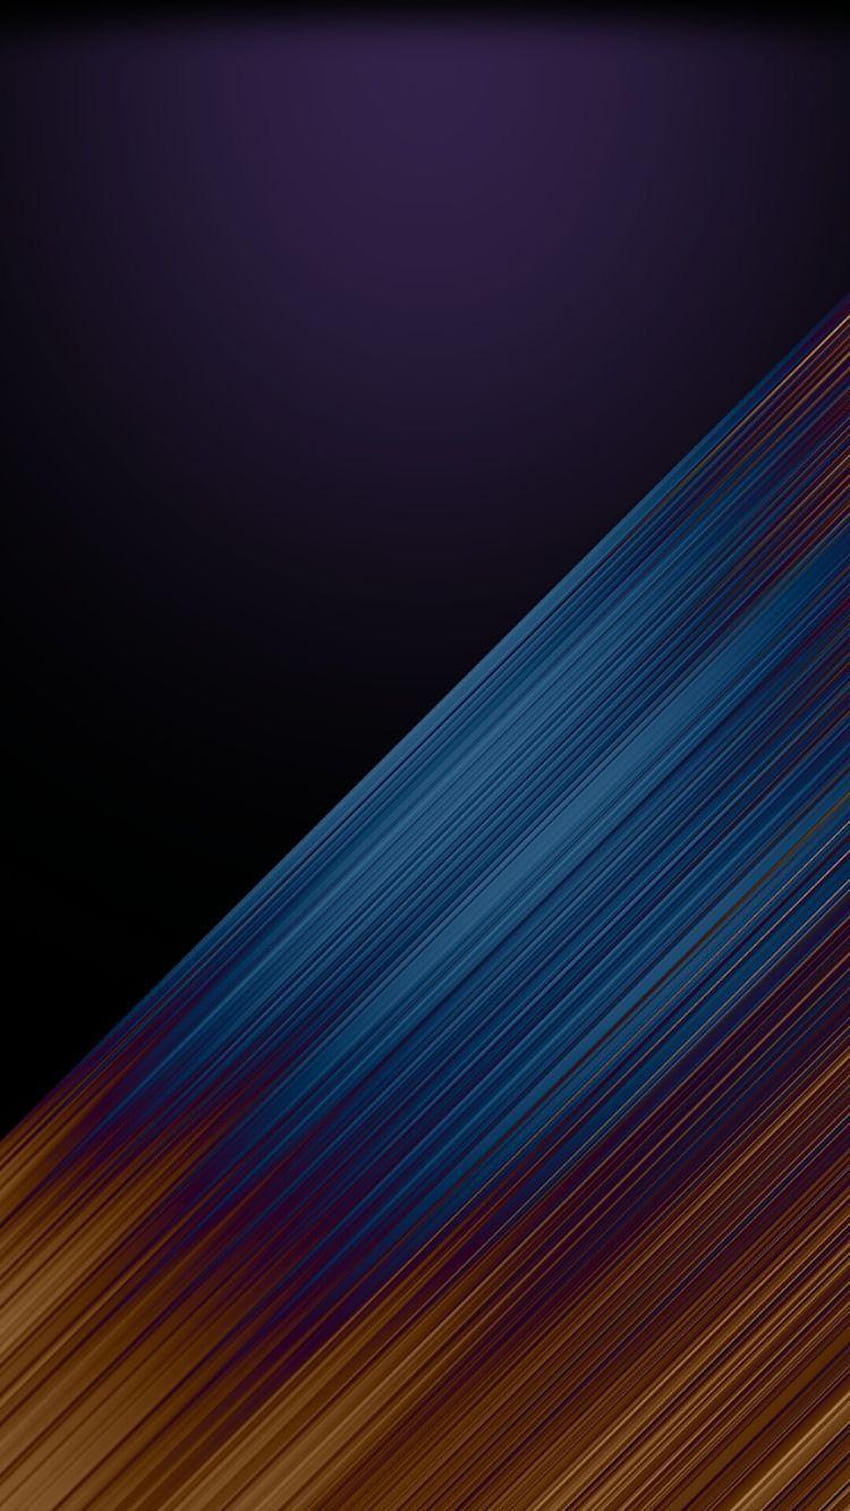 Samsung Galaxy J3 2016 wallpapers. Free download on Mob.org.